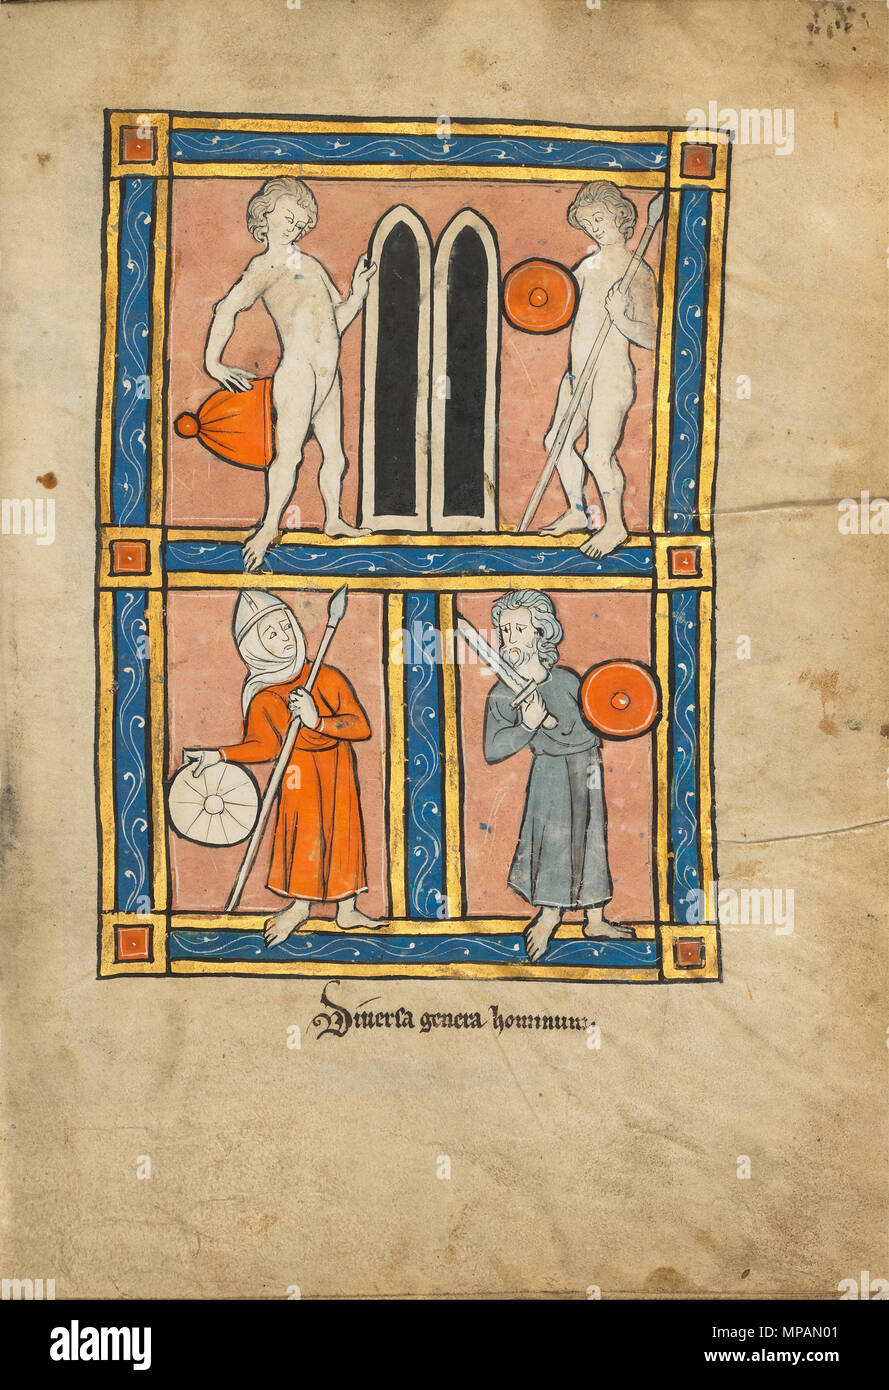 . English: Miniature of four men of different races with their respective weapons/equipment, glossed Diversa genera hominum. From Mirabilia Mundi, a section on the monstrous races of humans based on Pliny the Elder, with seven full page illustrations (foll. 117r - 120r). This is the last of seven illustrations showing 'civilized' (or at least familiar) peoples, following the depiction of various monstrous or uncultured races. circa 1280. Anonymous 883 Men with Shields and Weapons - Google Art Project Stock Photo